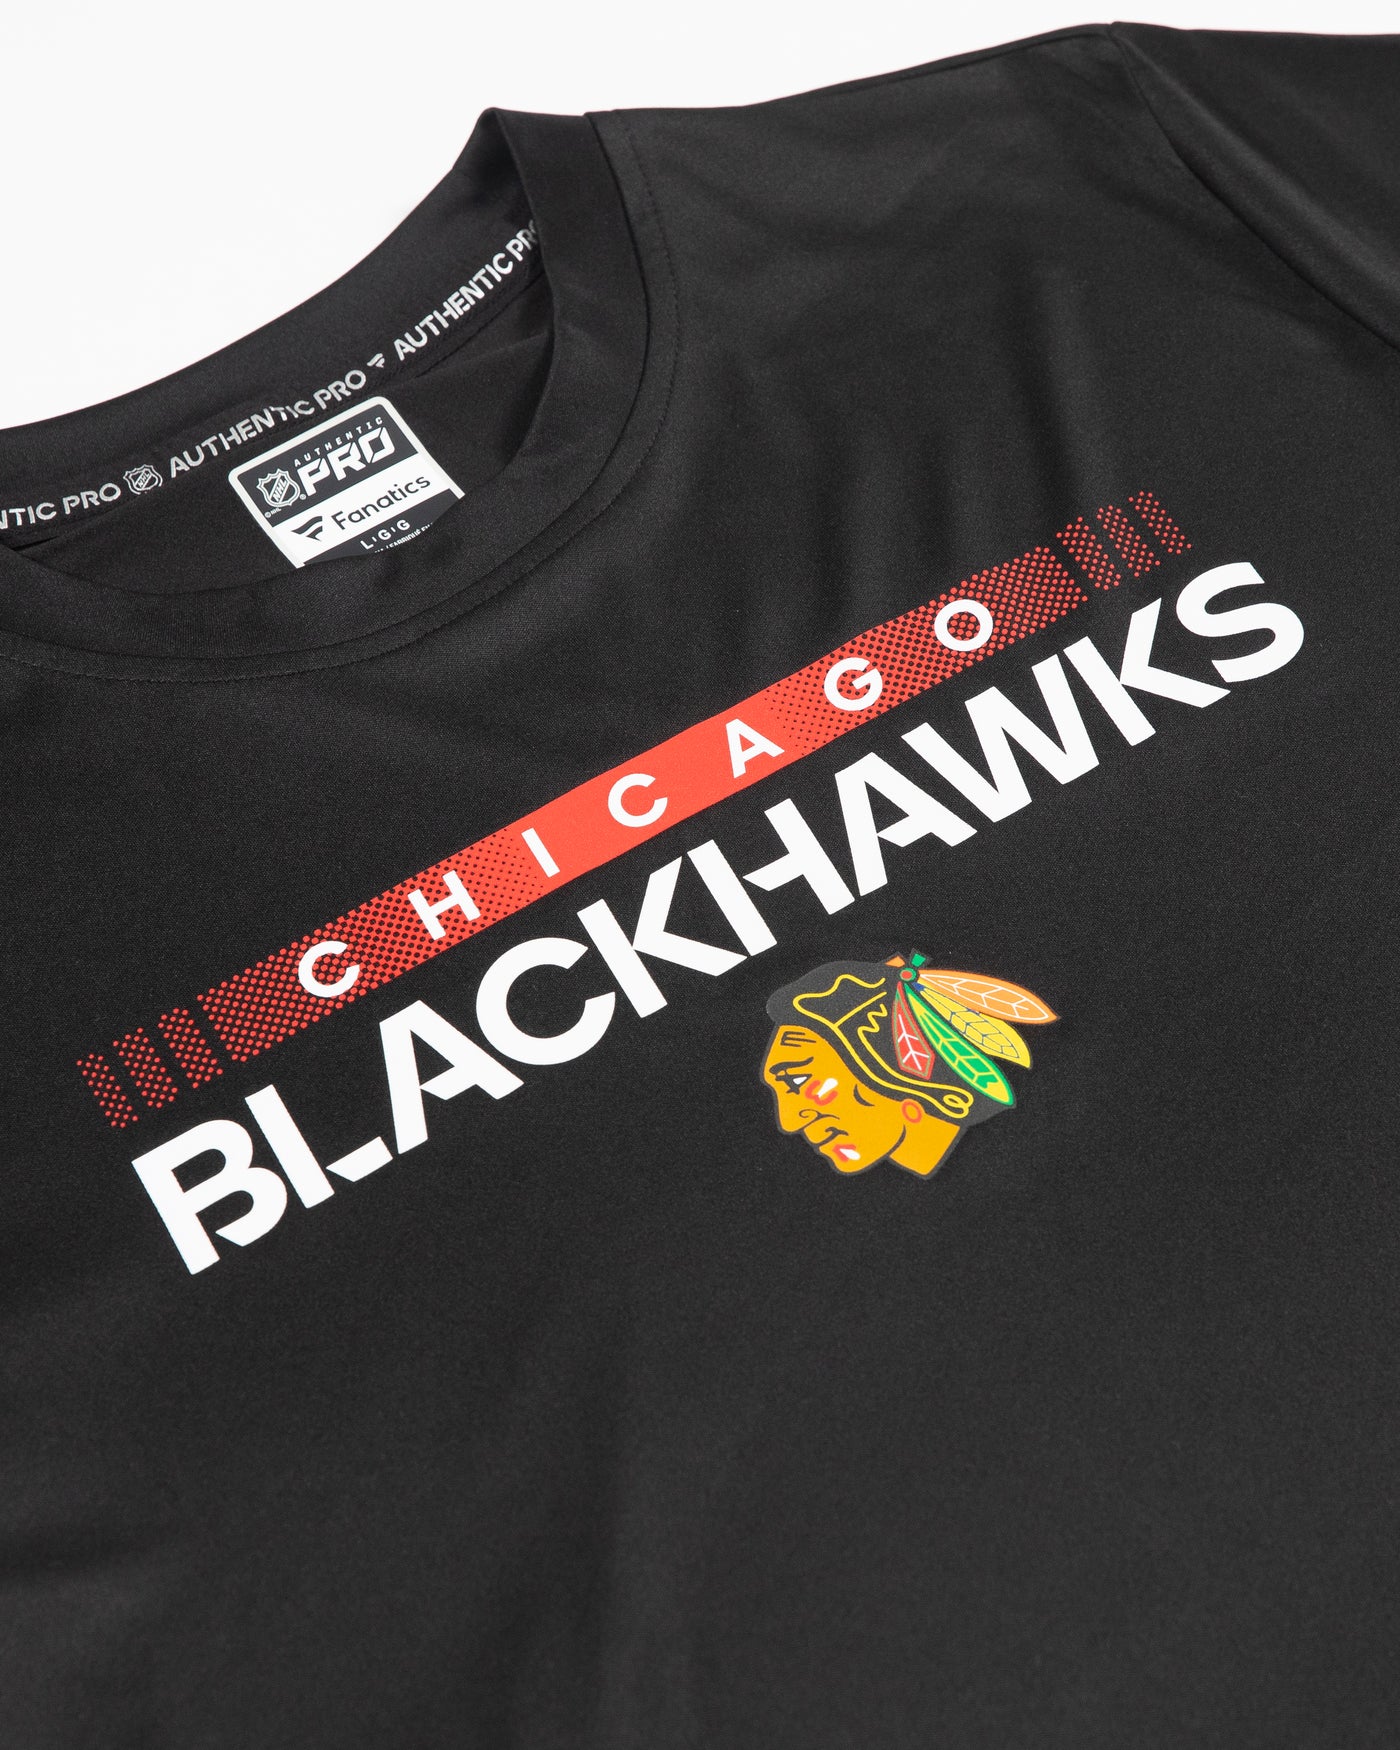 Fanatics Authentic Pro black t-shirt with Chicago Blackhawks wordmark and primary logo graphic across chest - detail llay flat